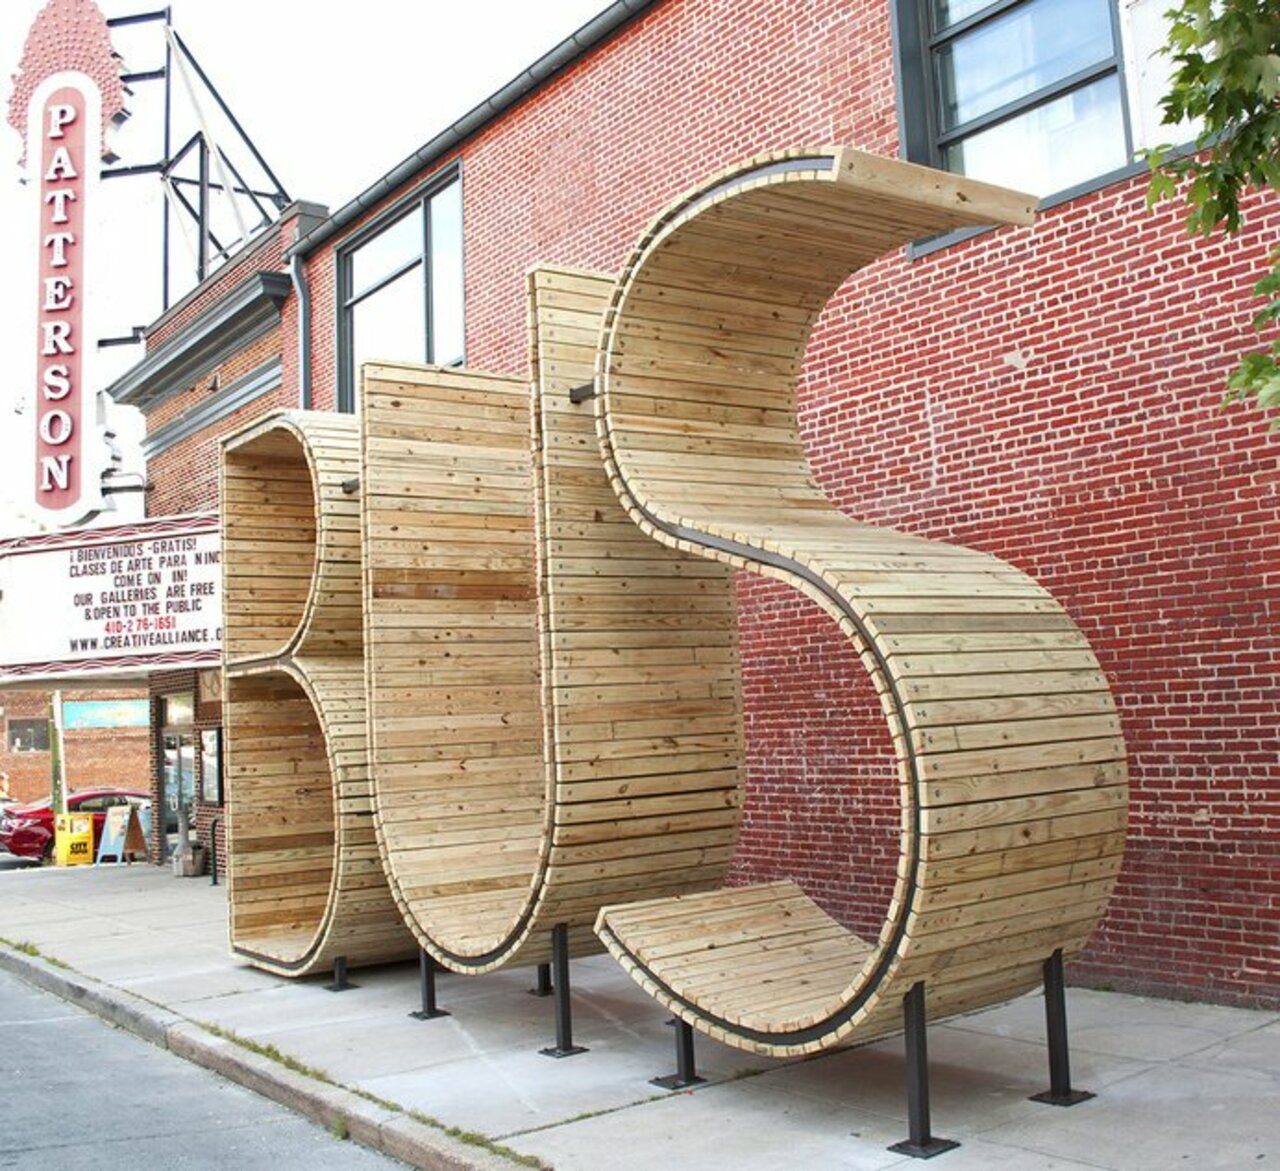 Coolest bus stop in Baltimore #designspiration #installation #art #design http://designspiration.net/image/16066186562545/ https://t.co/Cmt0sstrBo